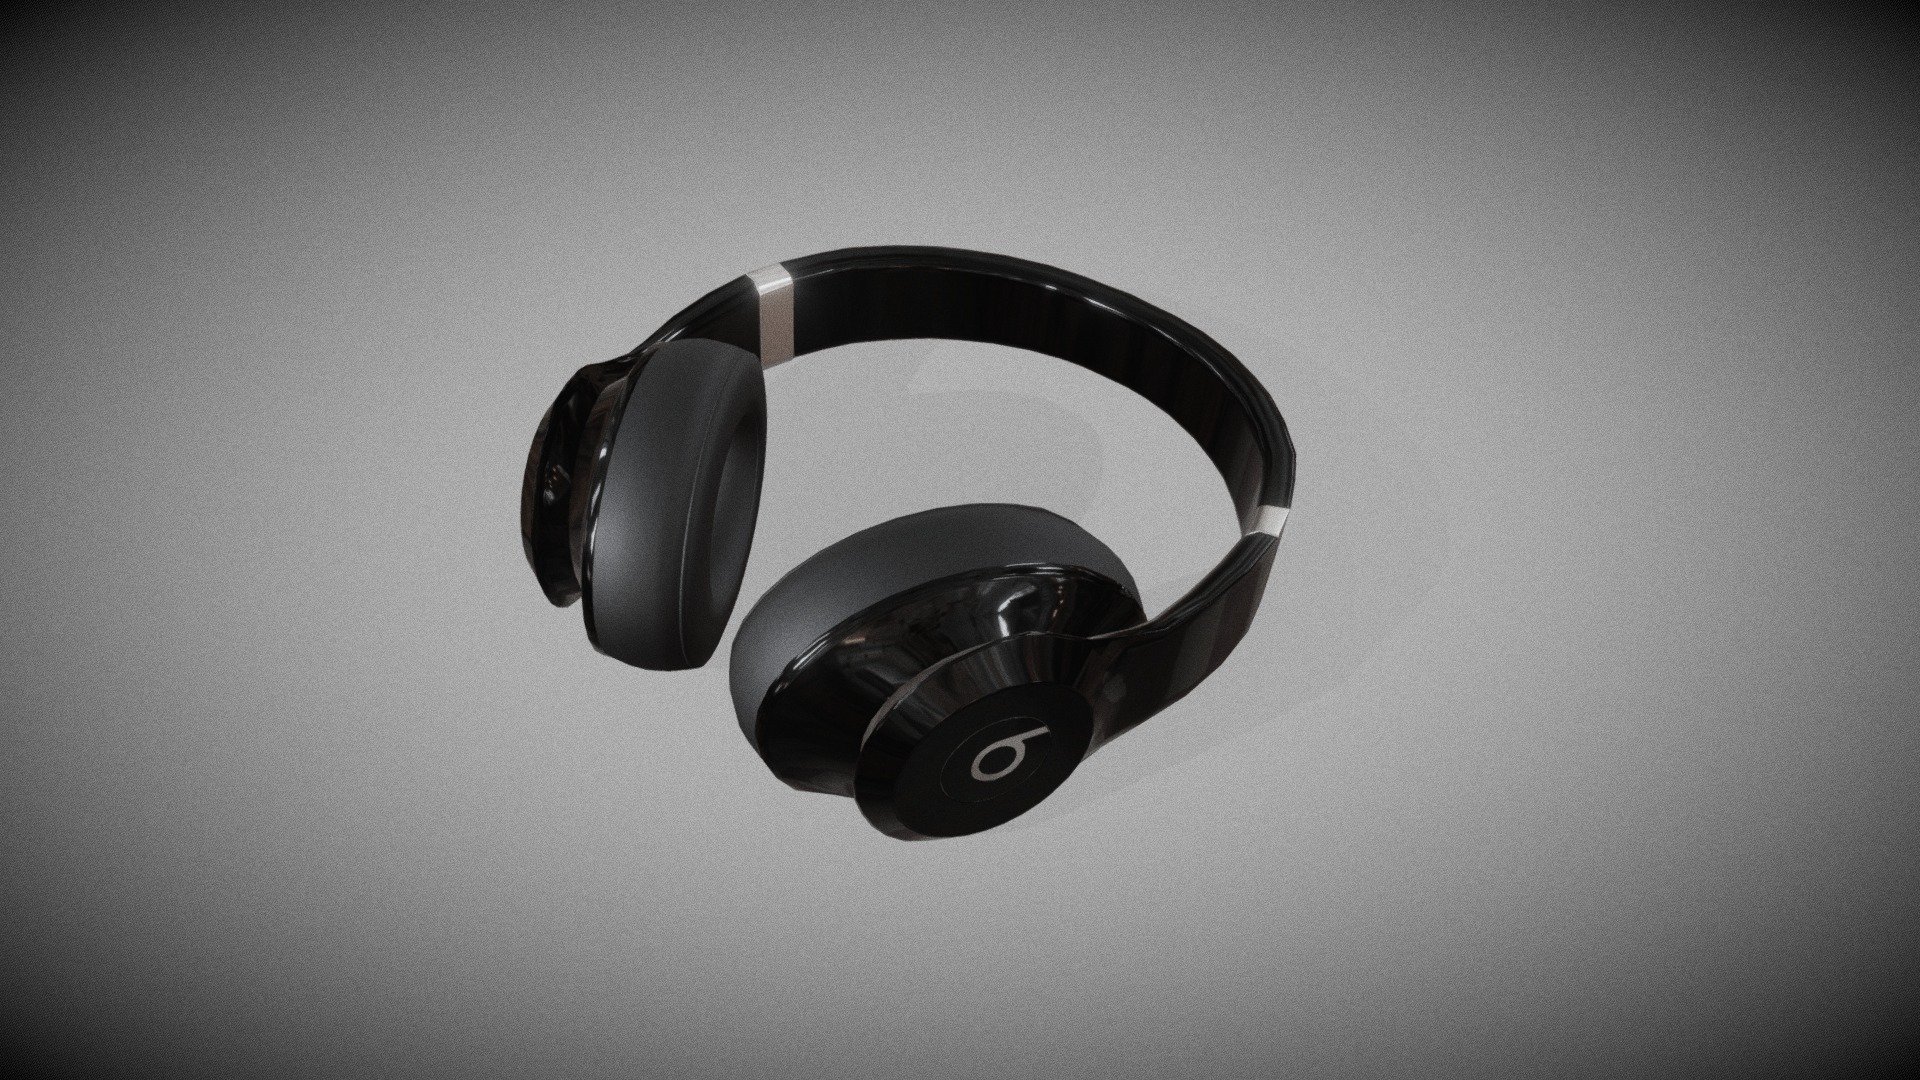 This is a quick little model I decided to make for my archviz projects. You can download these  for free as an obj.  These are based off of beats studio 3 over ear wireless headphones 3d model